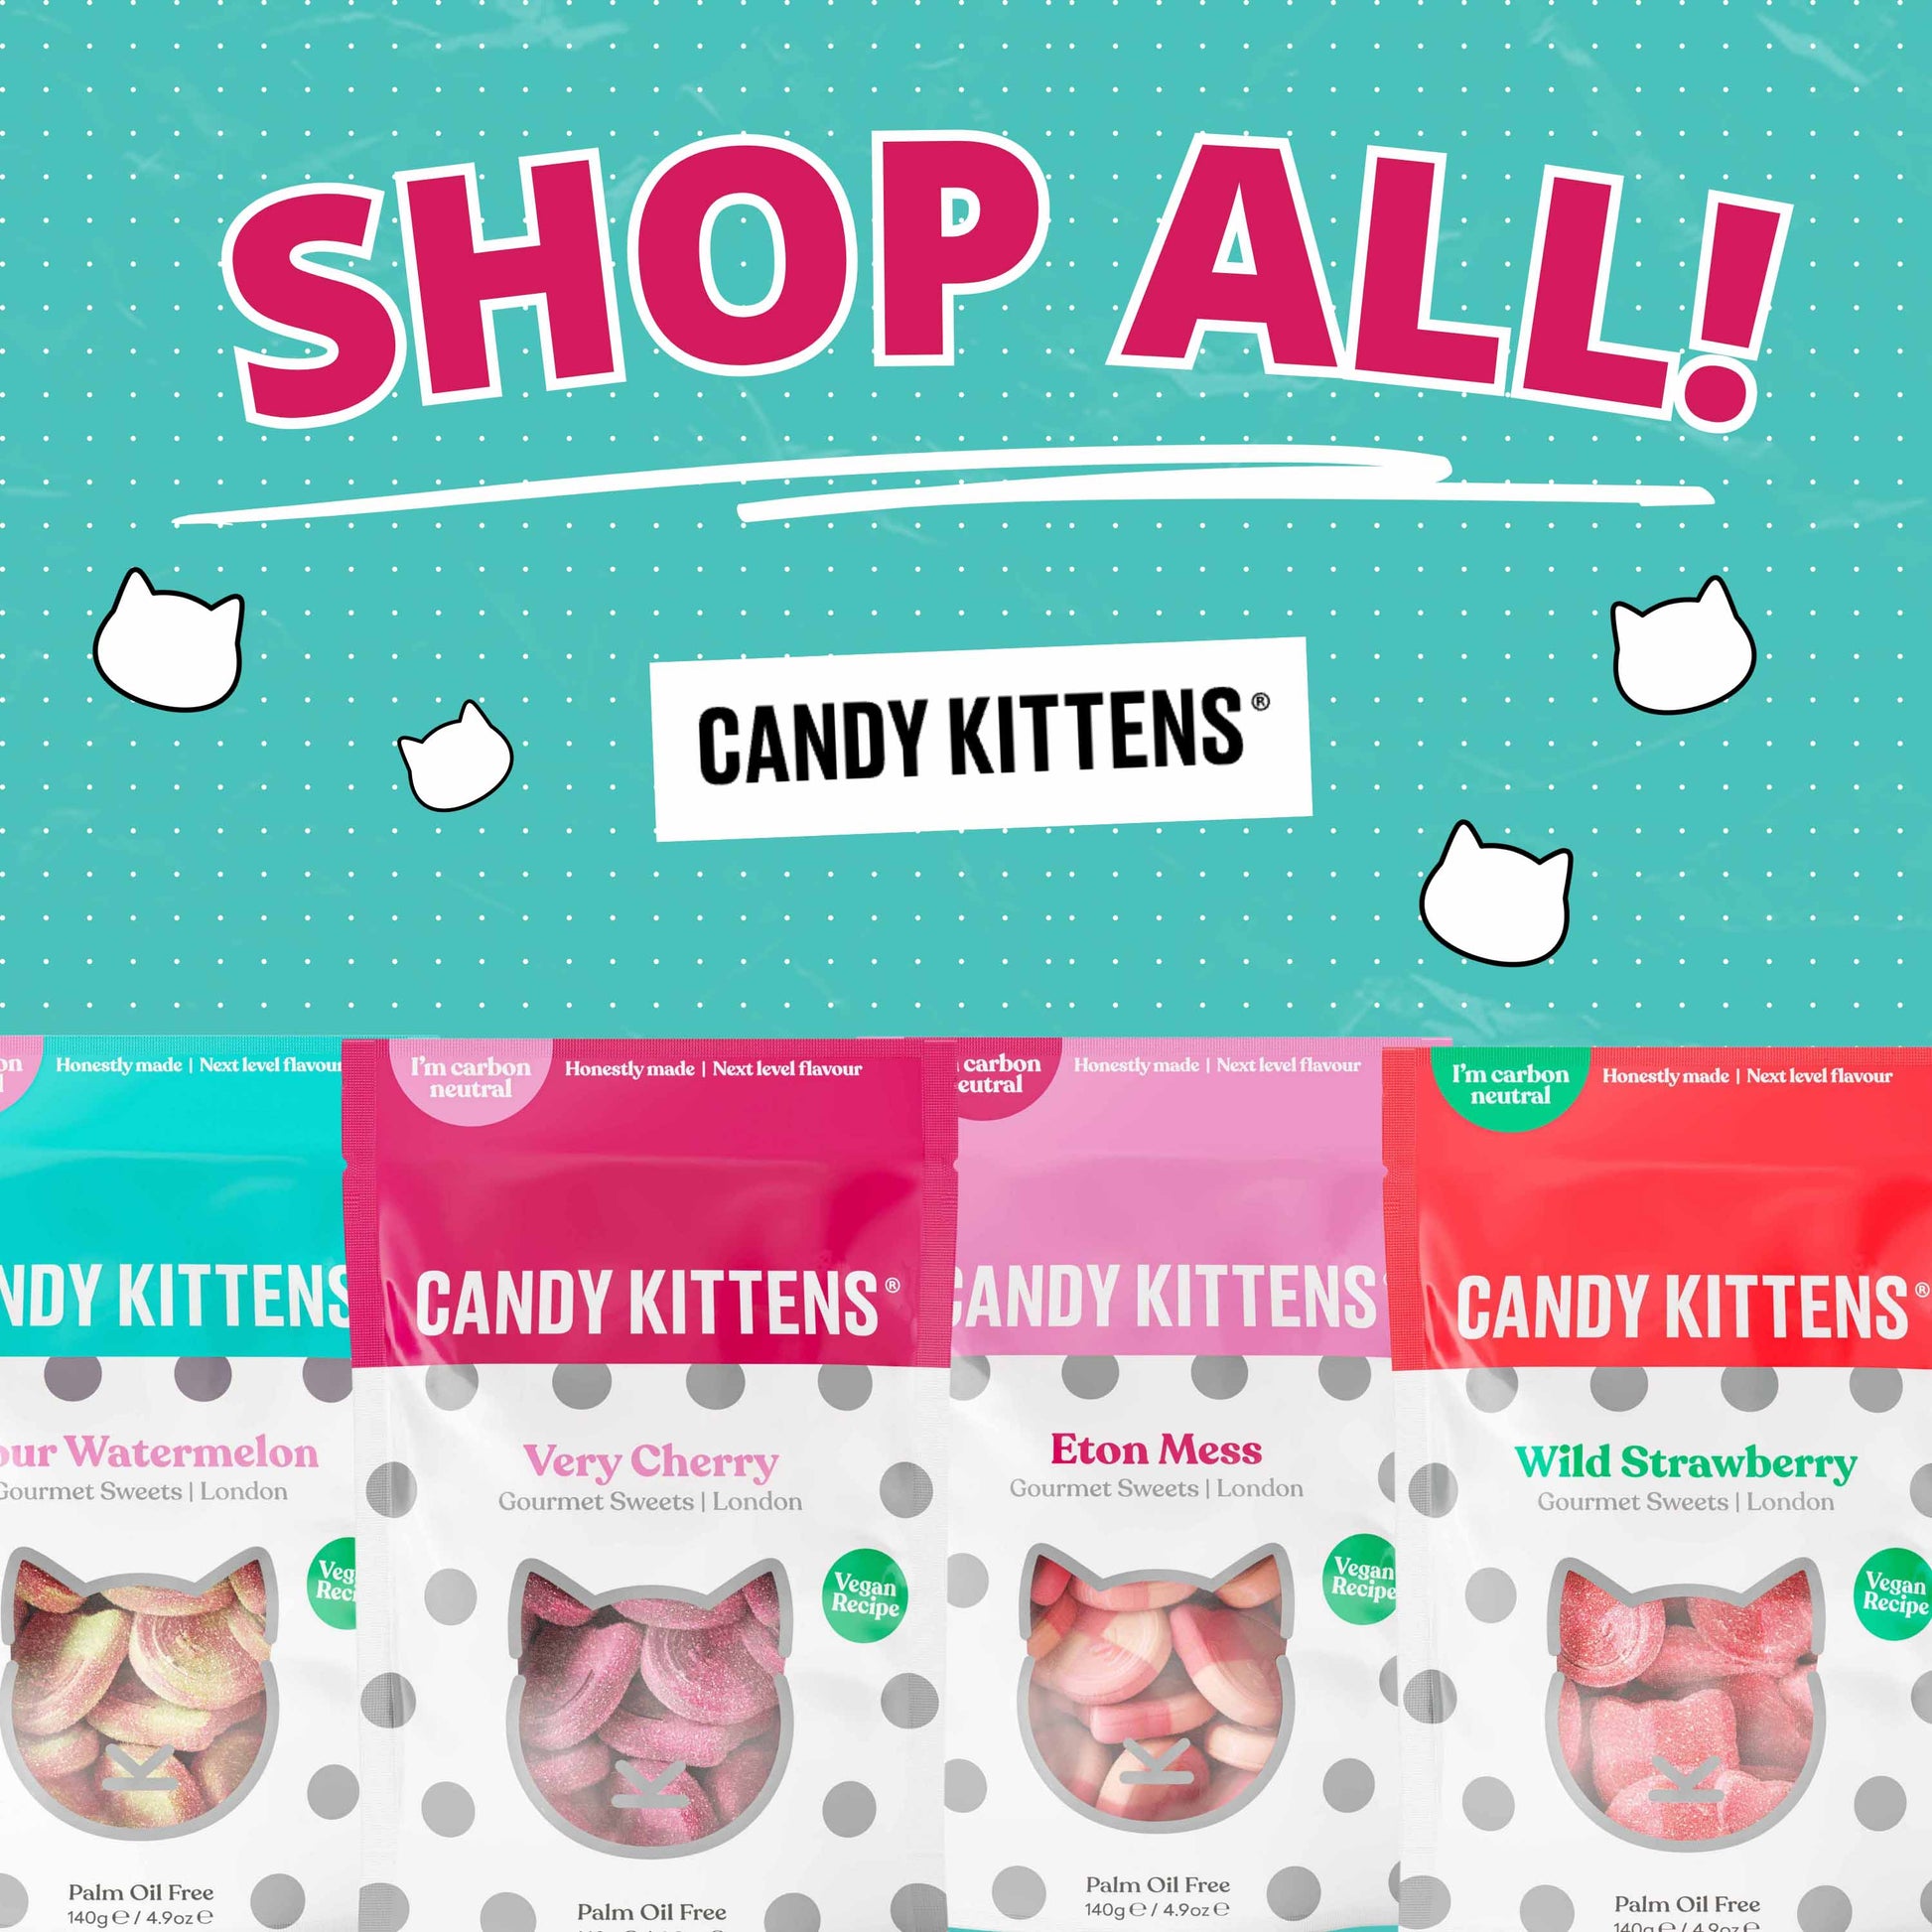 Candy Kittens Wild Strawberry Gourmet Sweets - 140g - Shop All Flavours